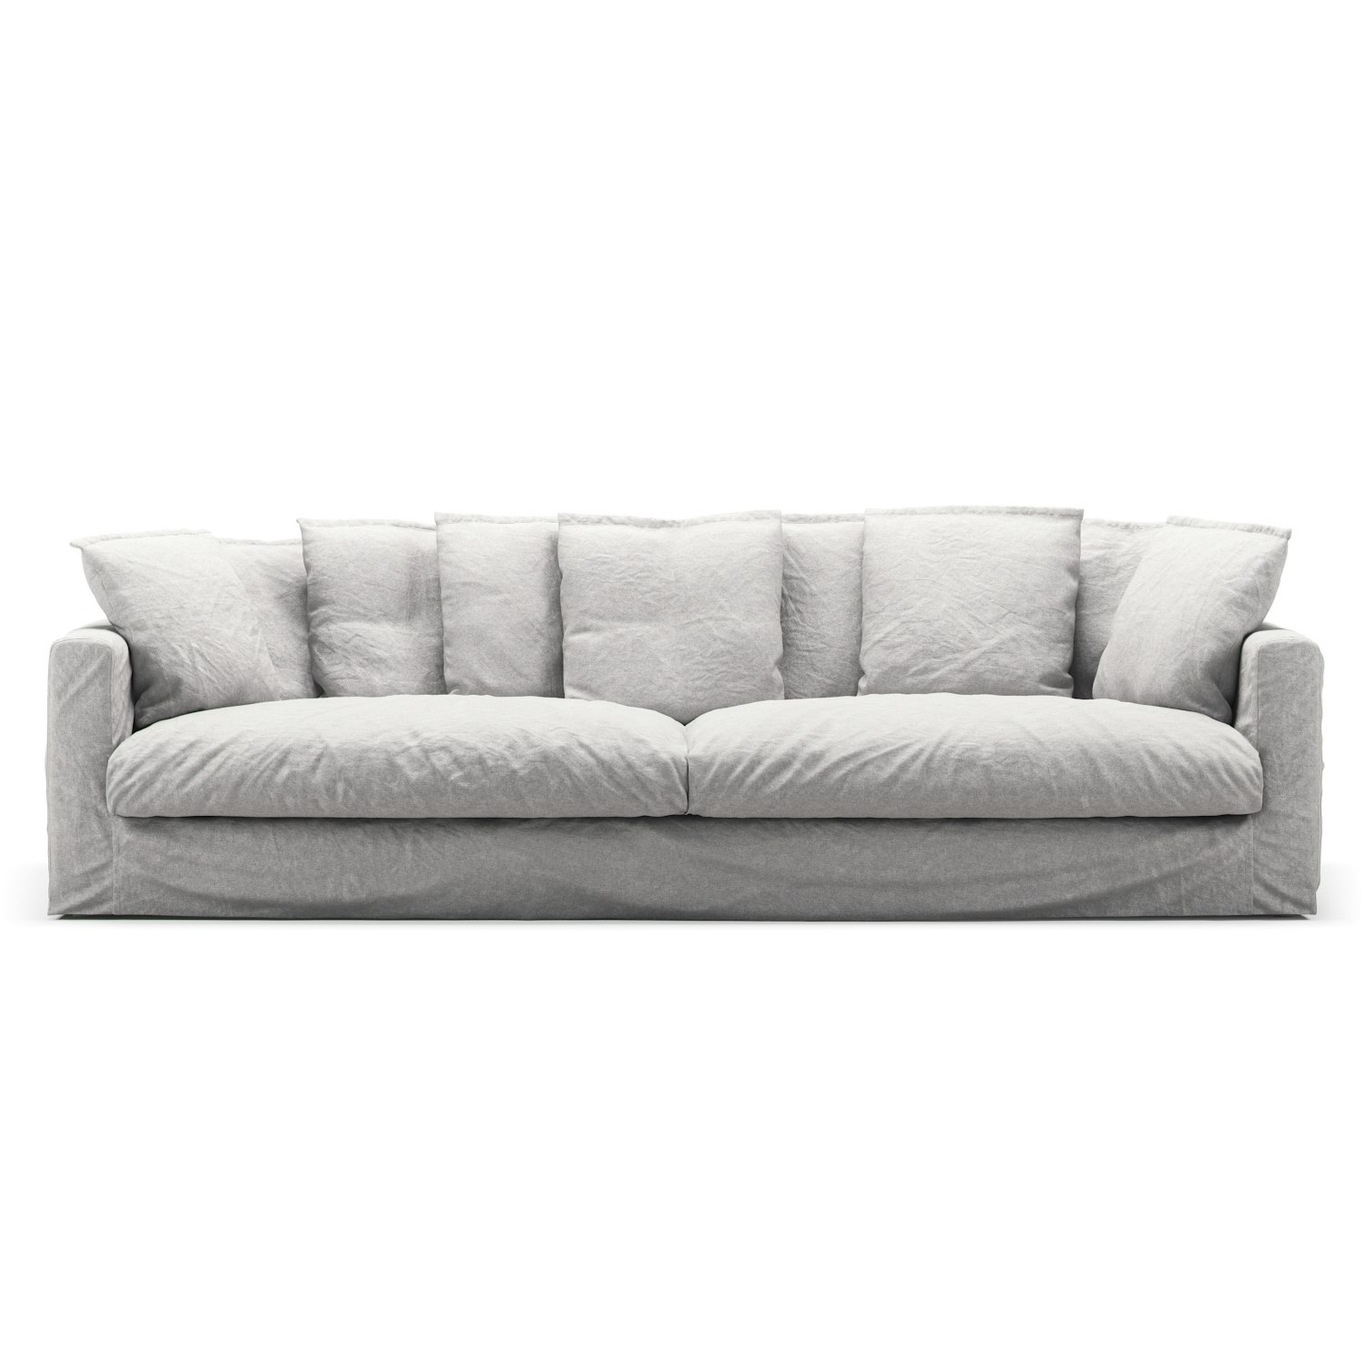 Le Grand Air Upholstery 4-Seater Linen, Misty Grey